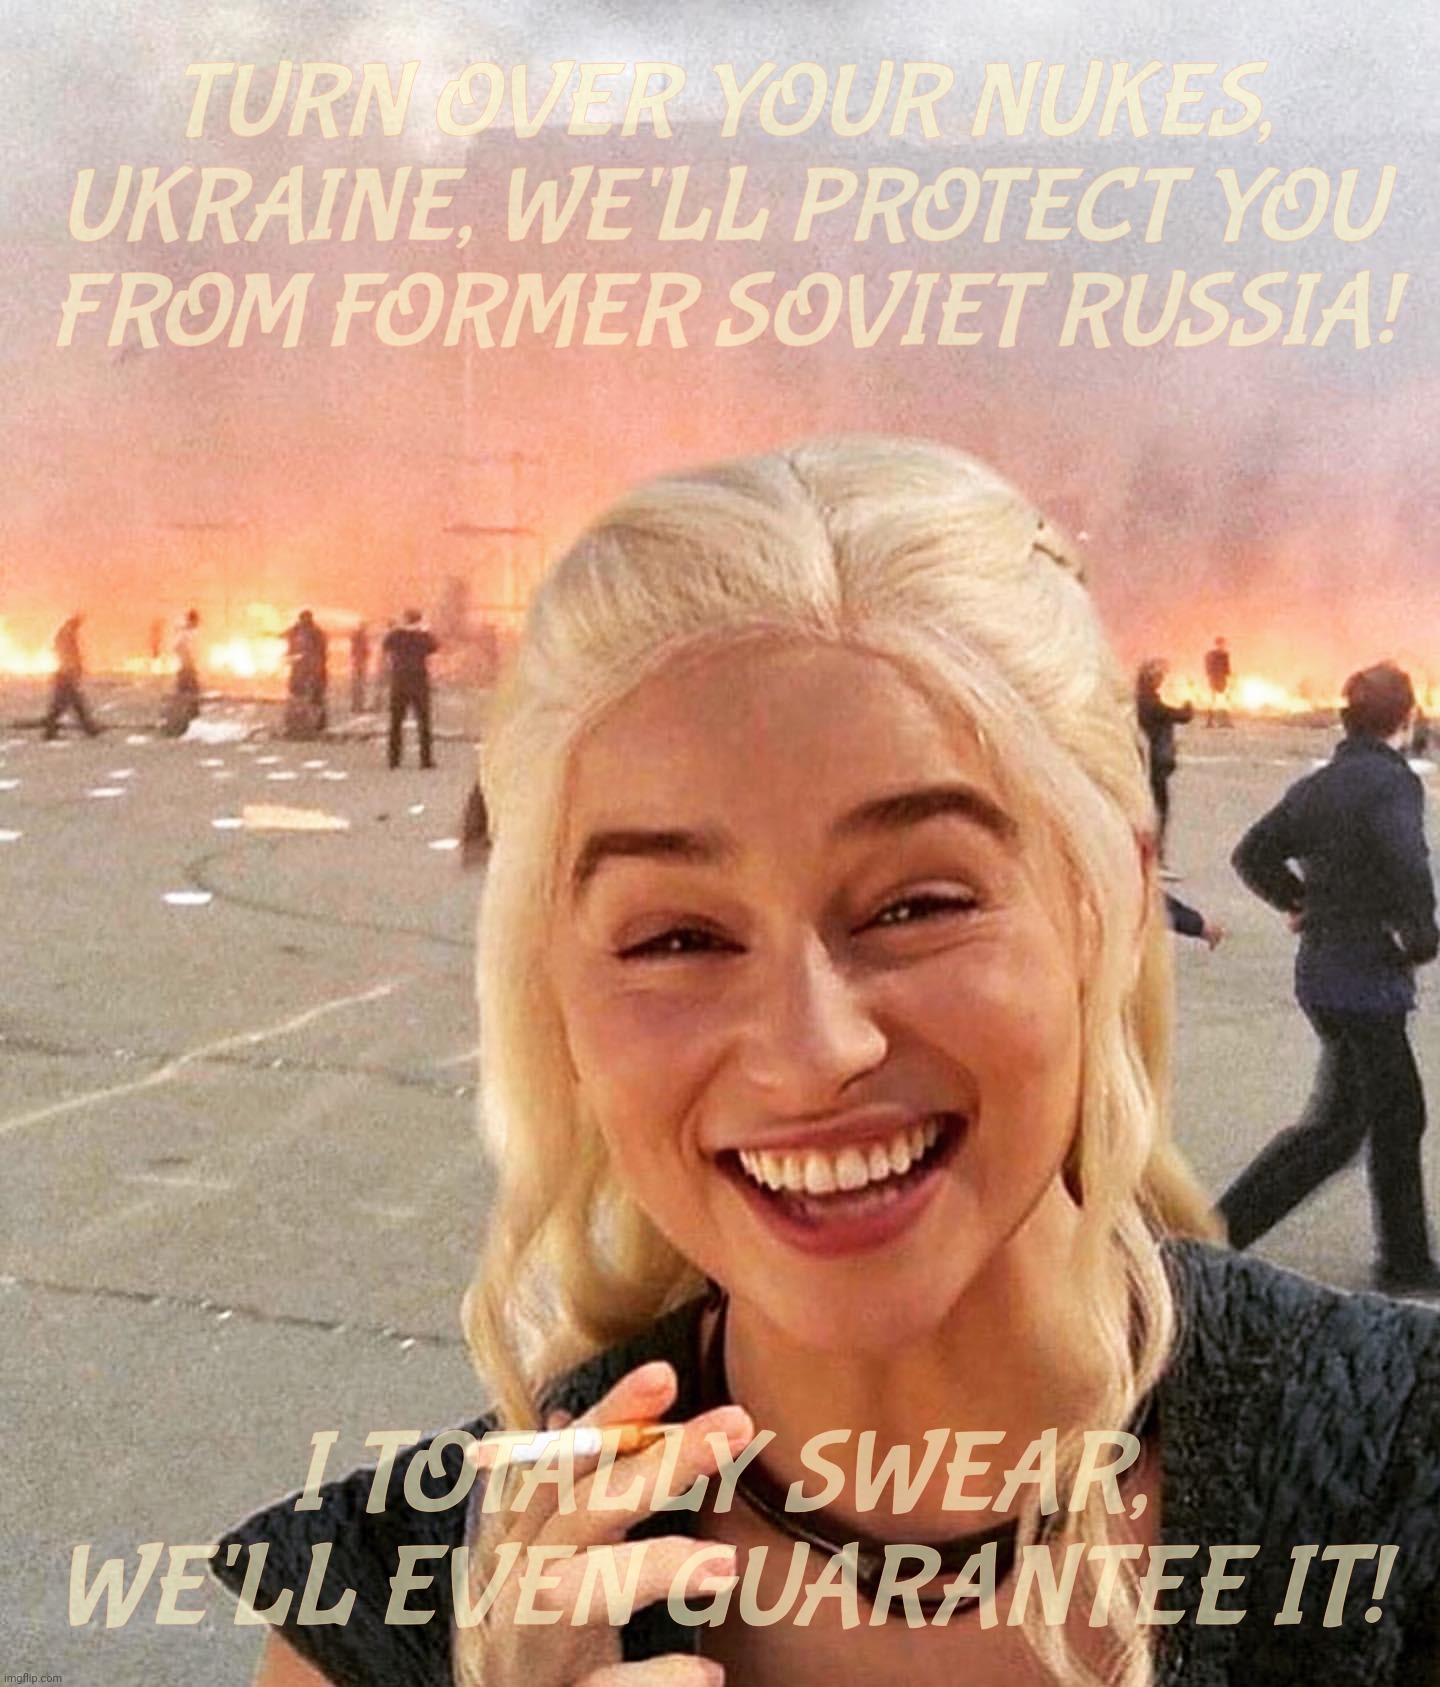 When 1991 optimism ran awry. Meme comment on Fak_u_lol's meme: https://imgflip.com/i/7w9kr6 | TURN OVER YOUR NUKES,
UKRAINE, WE'LL PROTECT YOU
FROM FORMER SOVIET RUSSIA! I TOTALLY SWEAR,
WE'LL EVEN GUARANTEE IT! | image tagged in disaster smoker girl | made w/ Imgflip meme maker